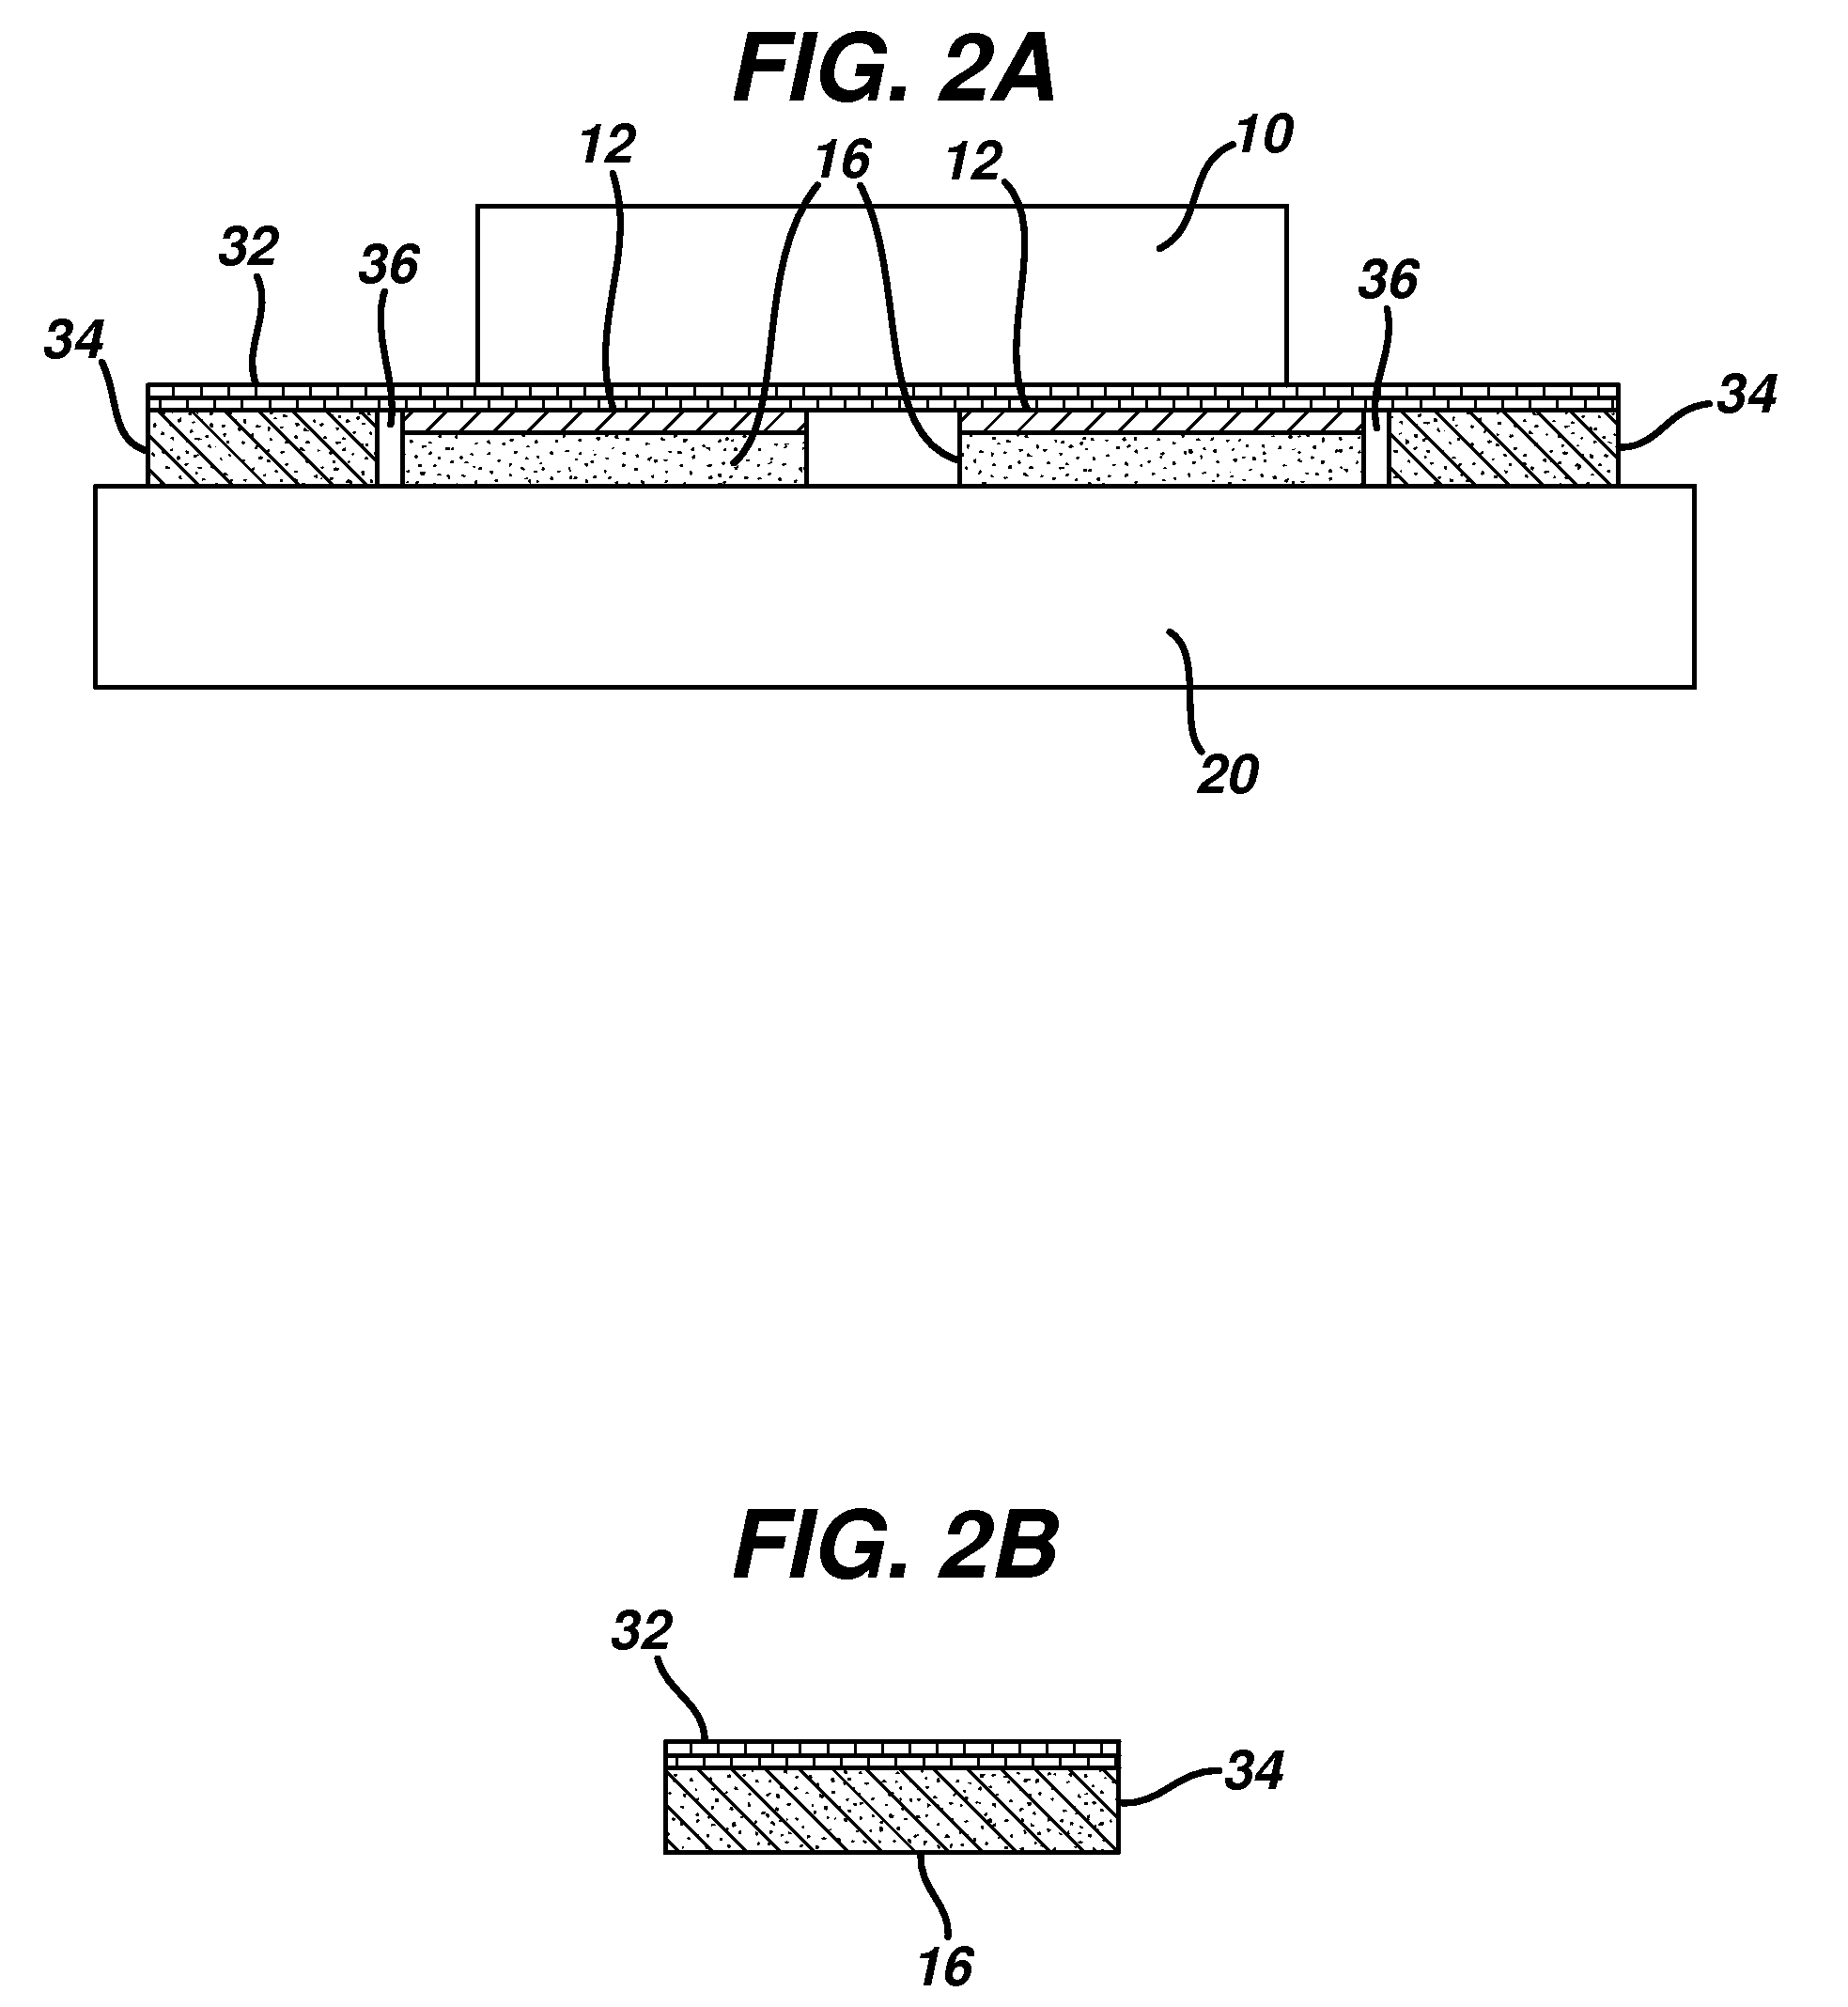 Microcurrent device with a sensory cue